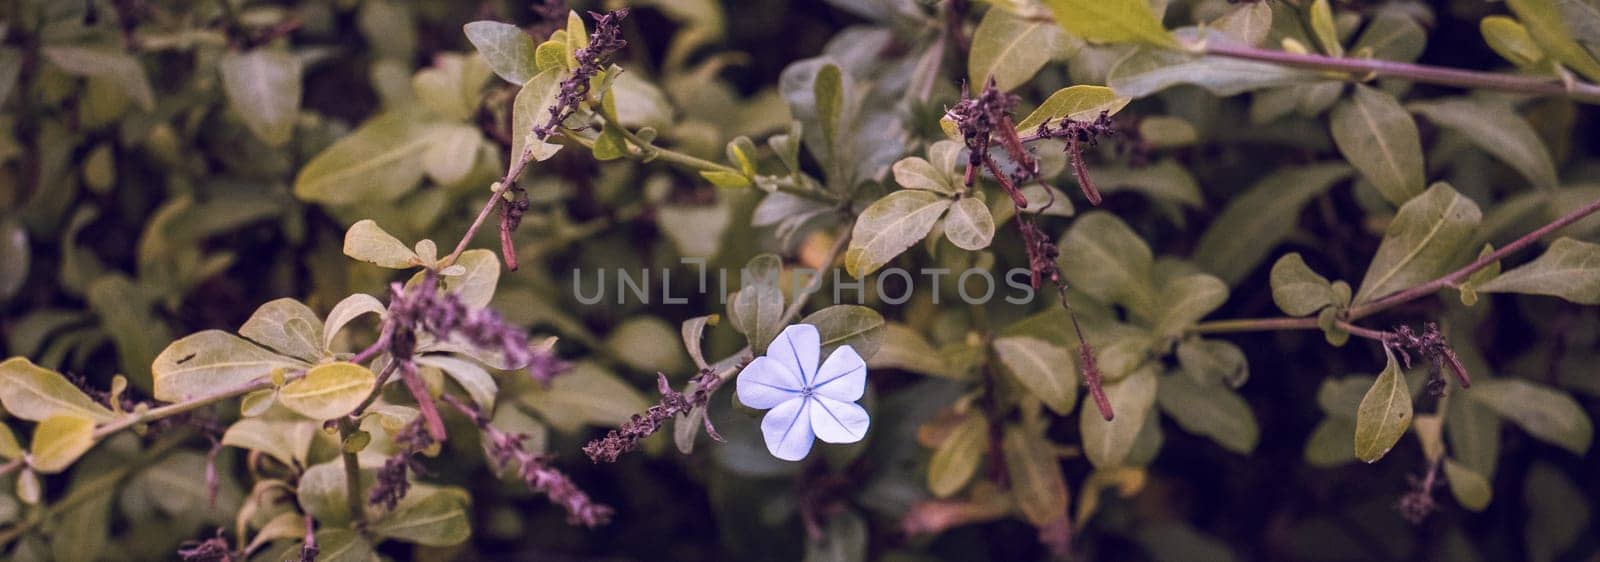 Close up blue meadow wildflowers concept photo. Countryside at autumn season. Garden blossom morning. Plumbago auriculata, Cape plumbago. High quality picture for wallpaper, article